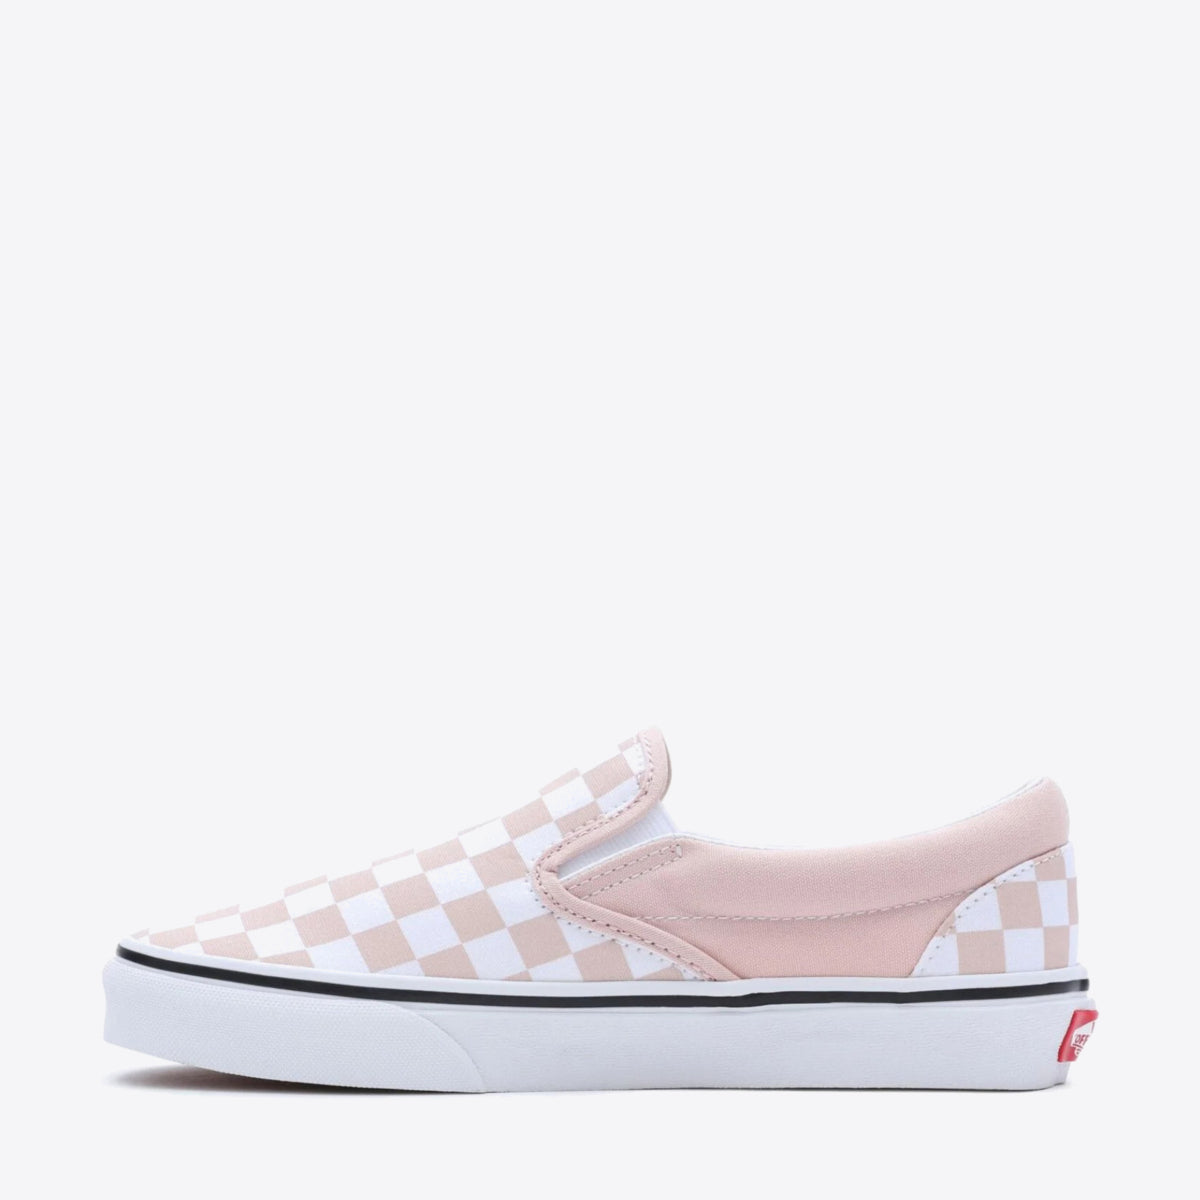 VANS Classic Slip-On Color Theory Checkerboard - Women's Rose Smoke - Image 2